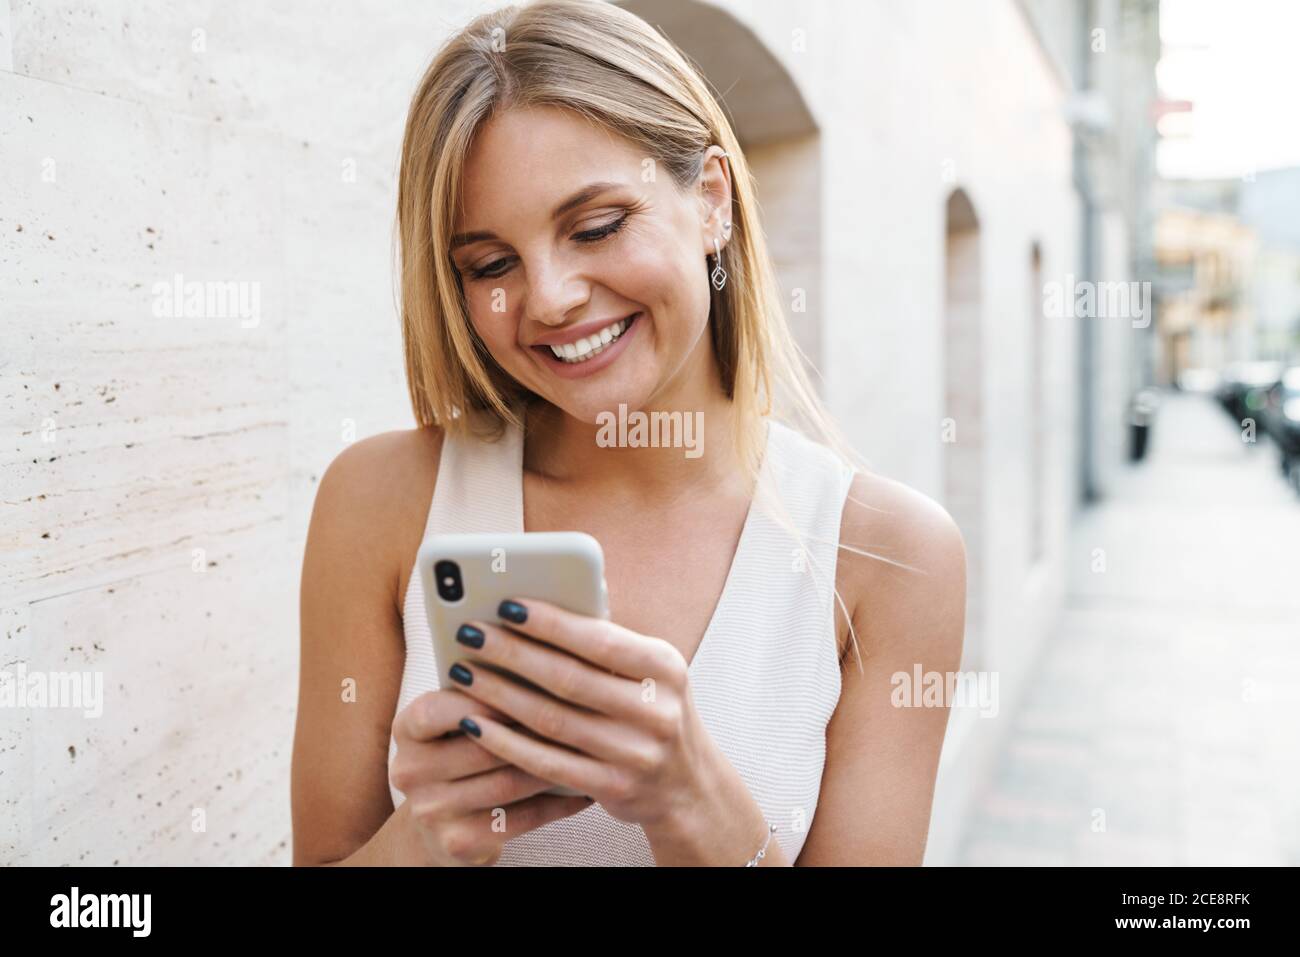 Image of happy blonde woman smiling and using mobile phone while walking on city street Stock Photo